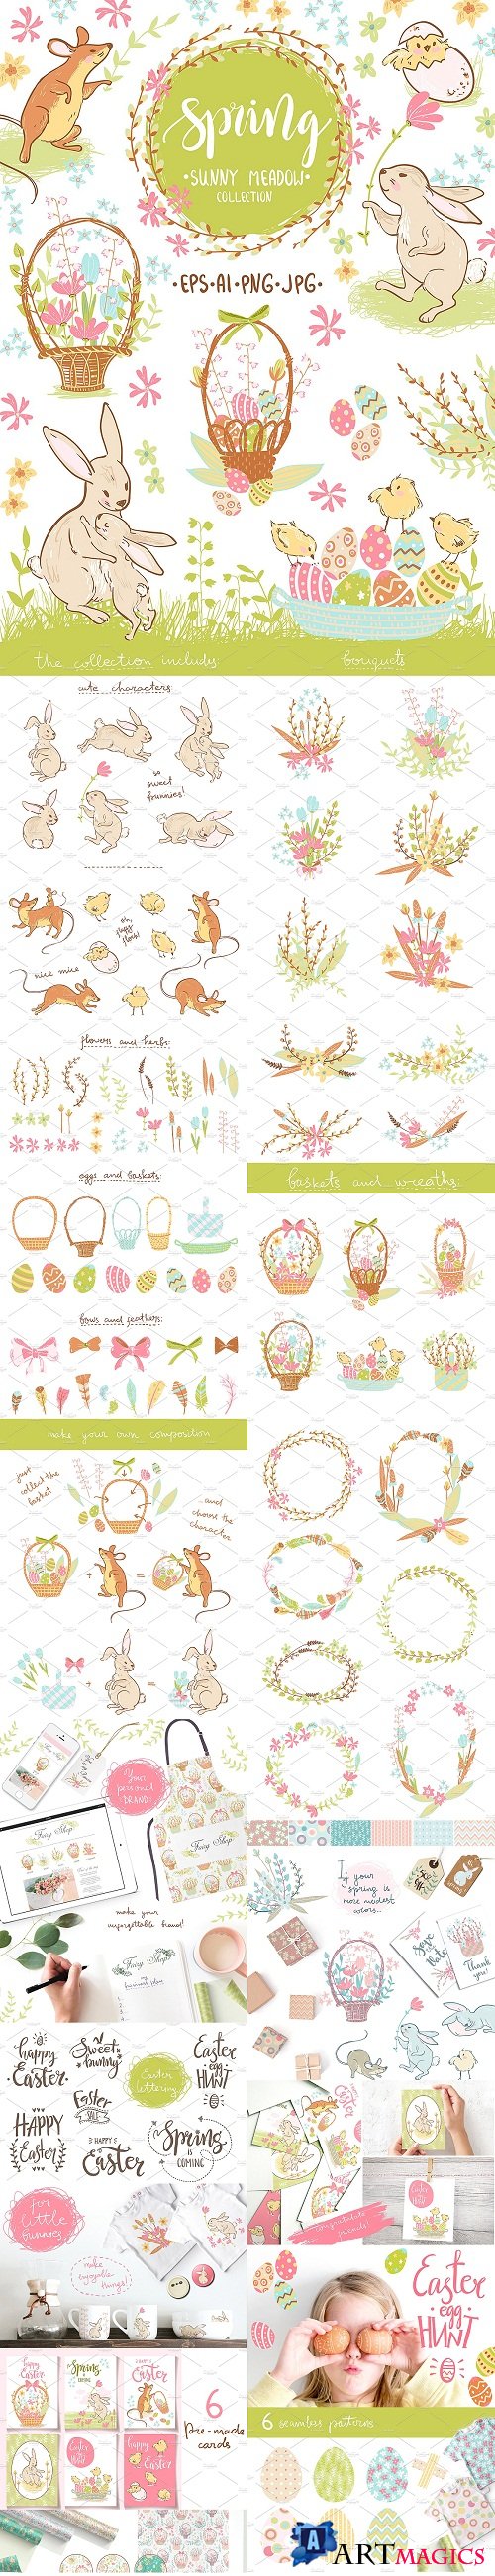 Spring meadow graphic set - 2331542